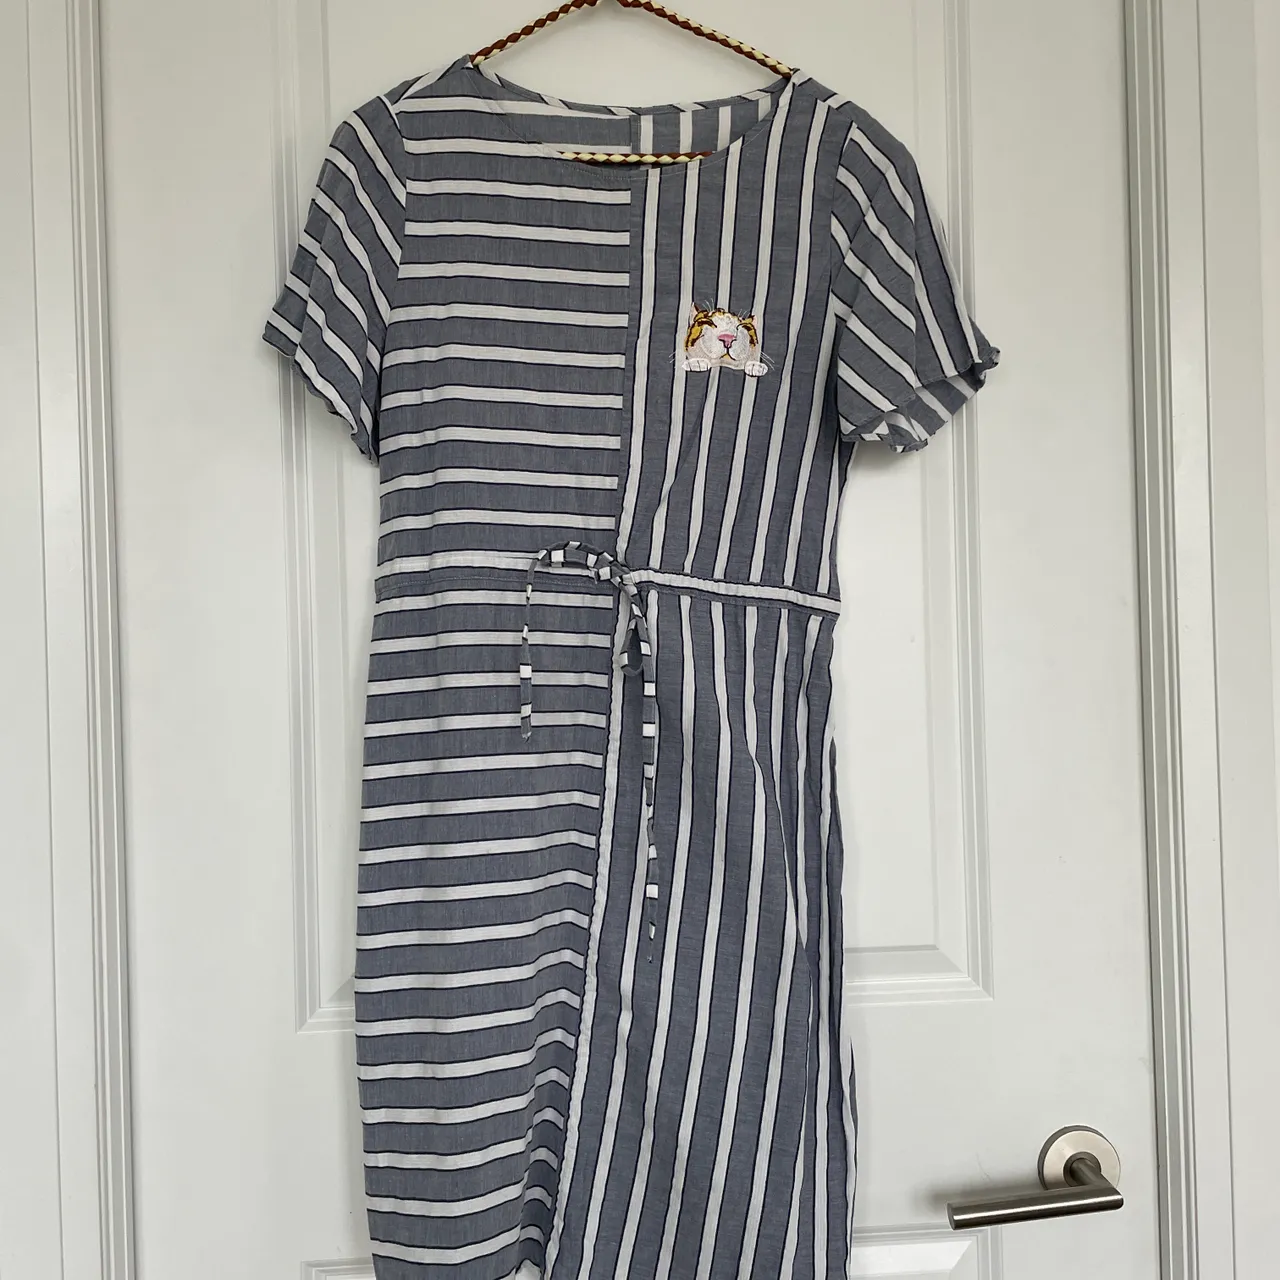 Striped blue and white dress with cat patch photo 1